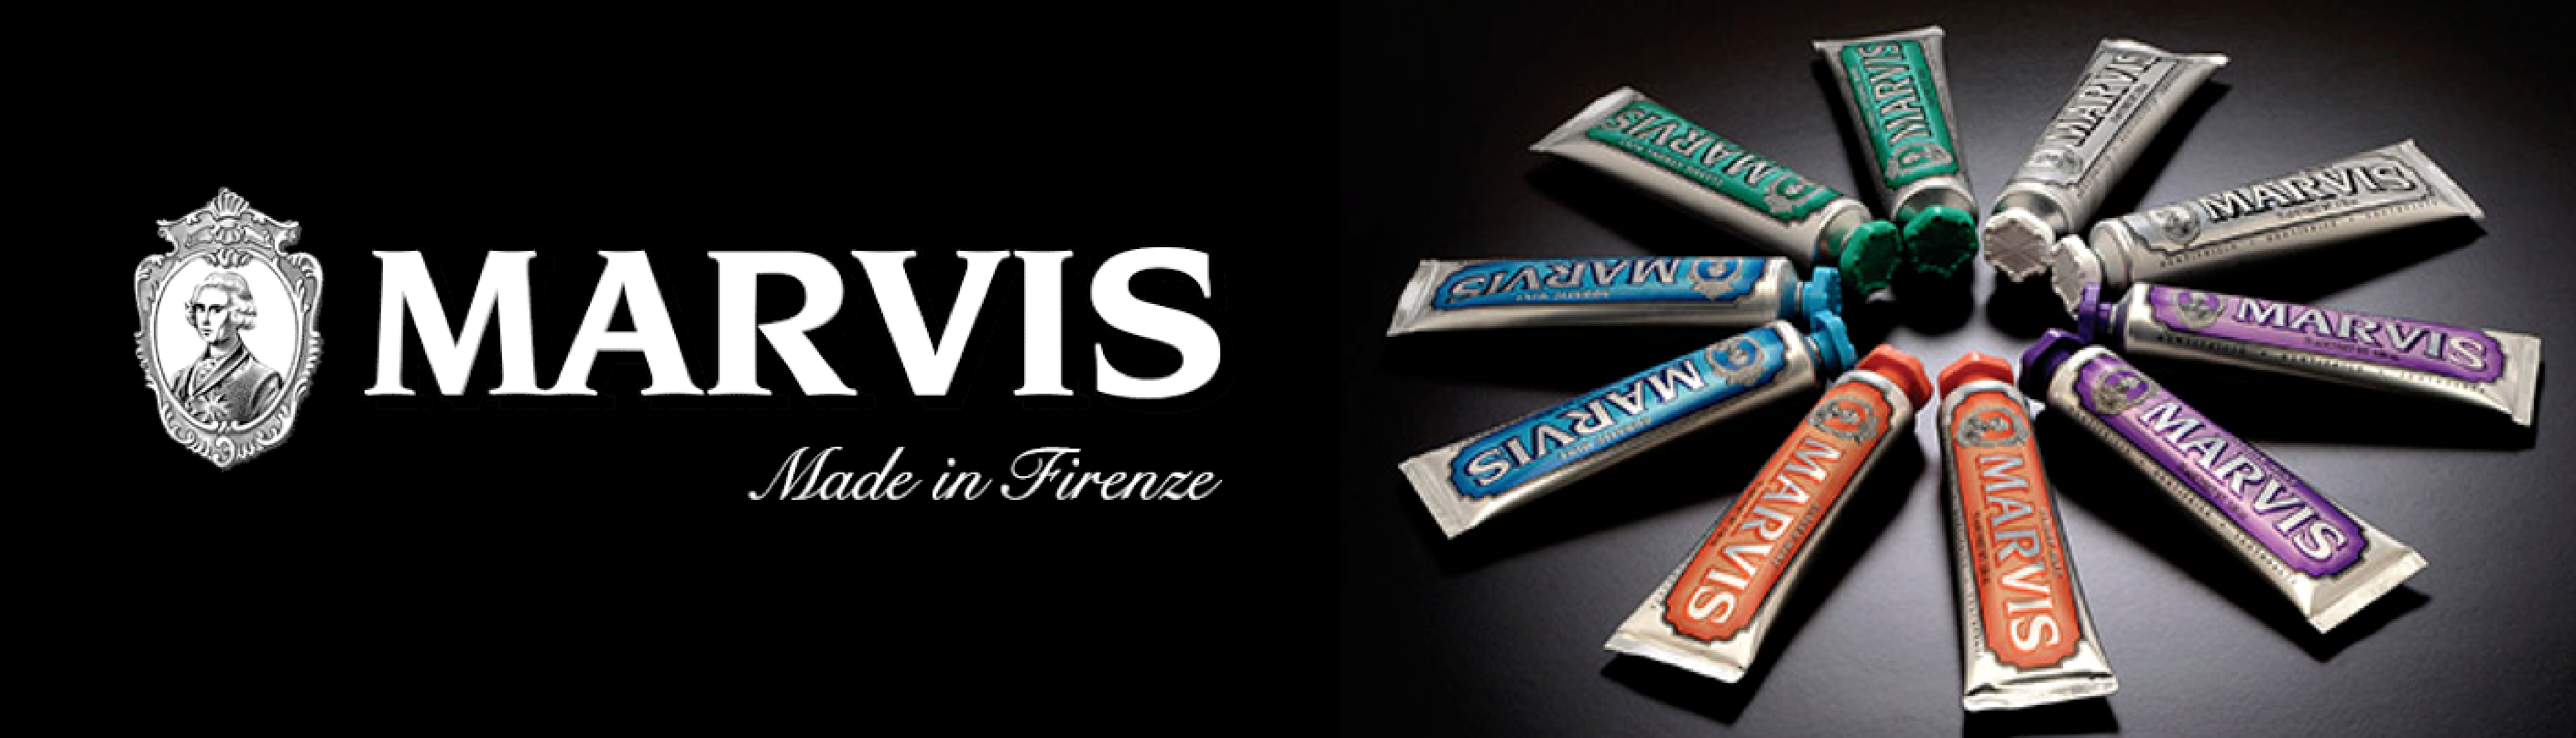 Marvis,Marvis Toothpaste,marvis classic strong mint 75ml,mavis strong mint,Marvis Toothpaste,marvis classic strong mint 